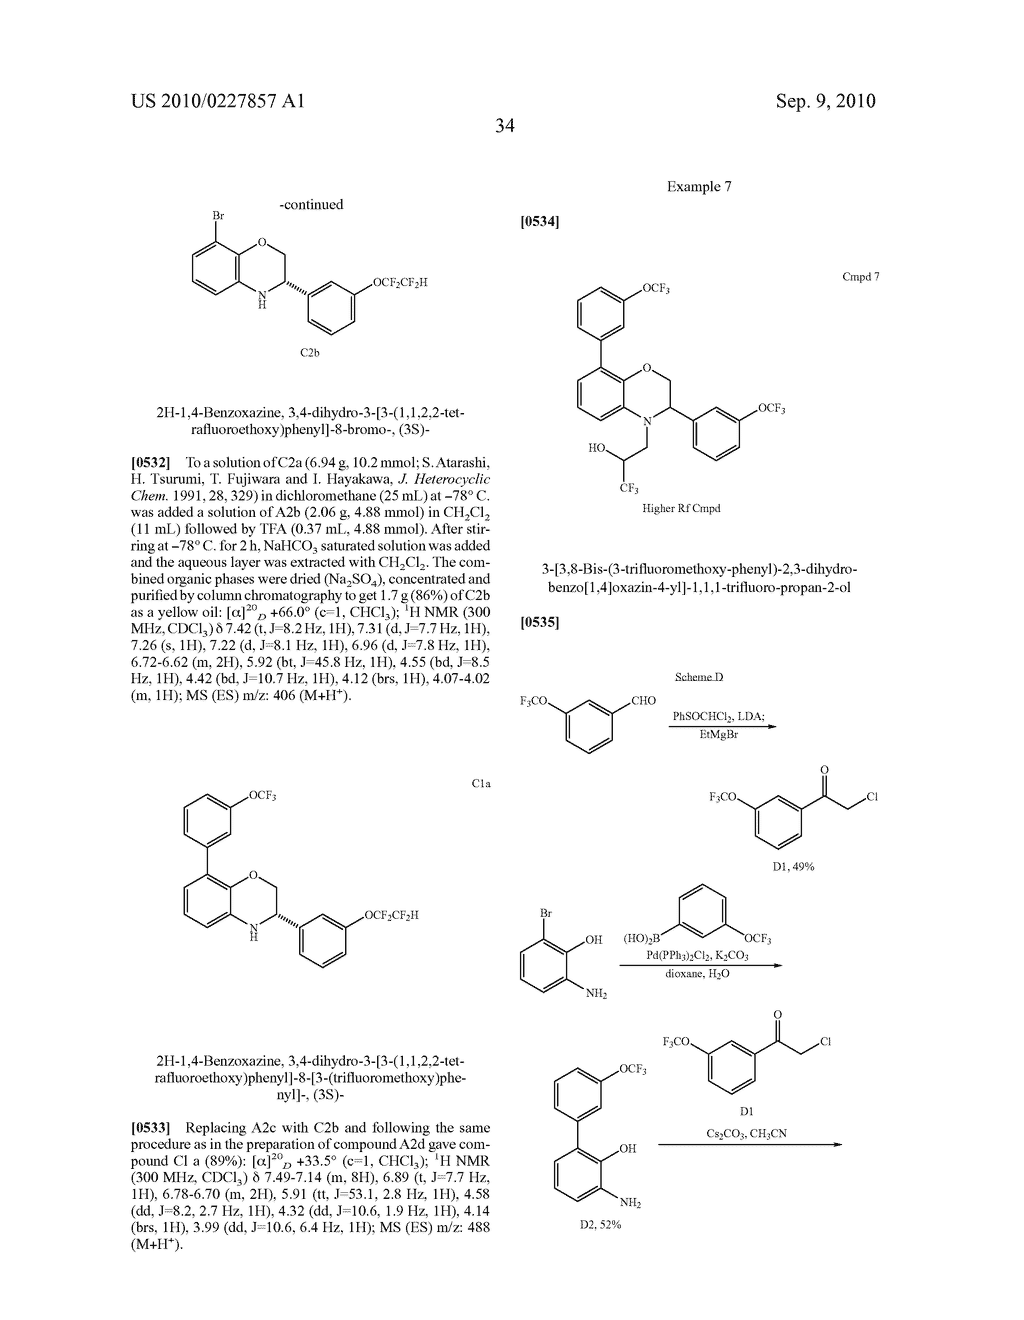 3,4-DIHYDRO-2H-BENZO[1,4]OXAZINE AND THIAZINE DERIVATIVES AS CETP INHIBITORS - diagram, schematic, and image 35